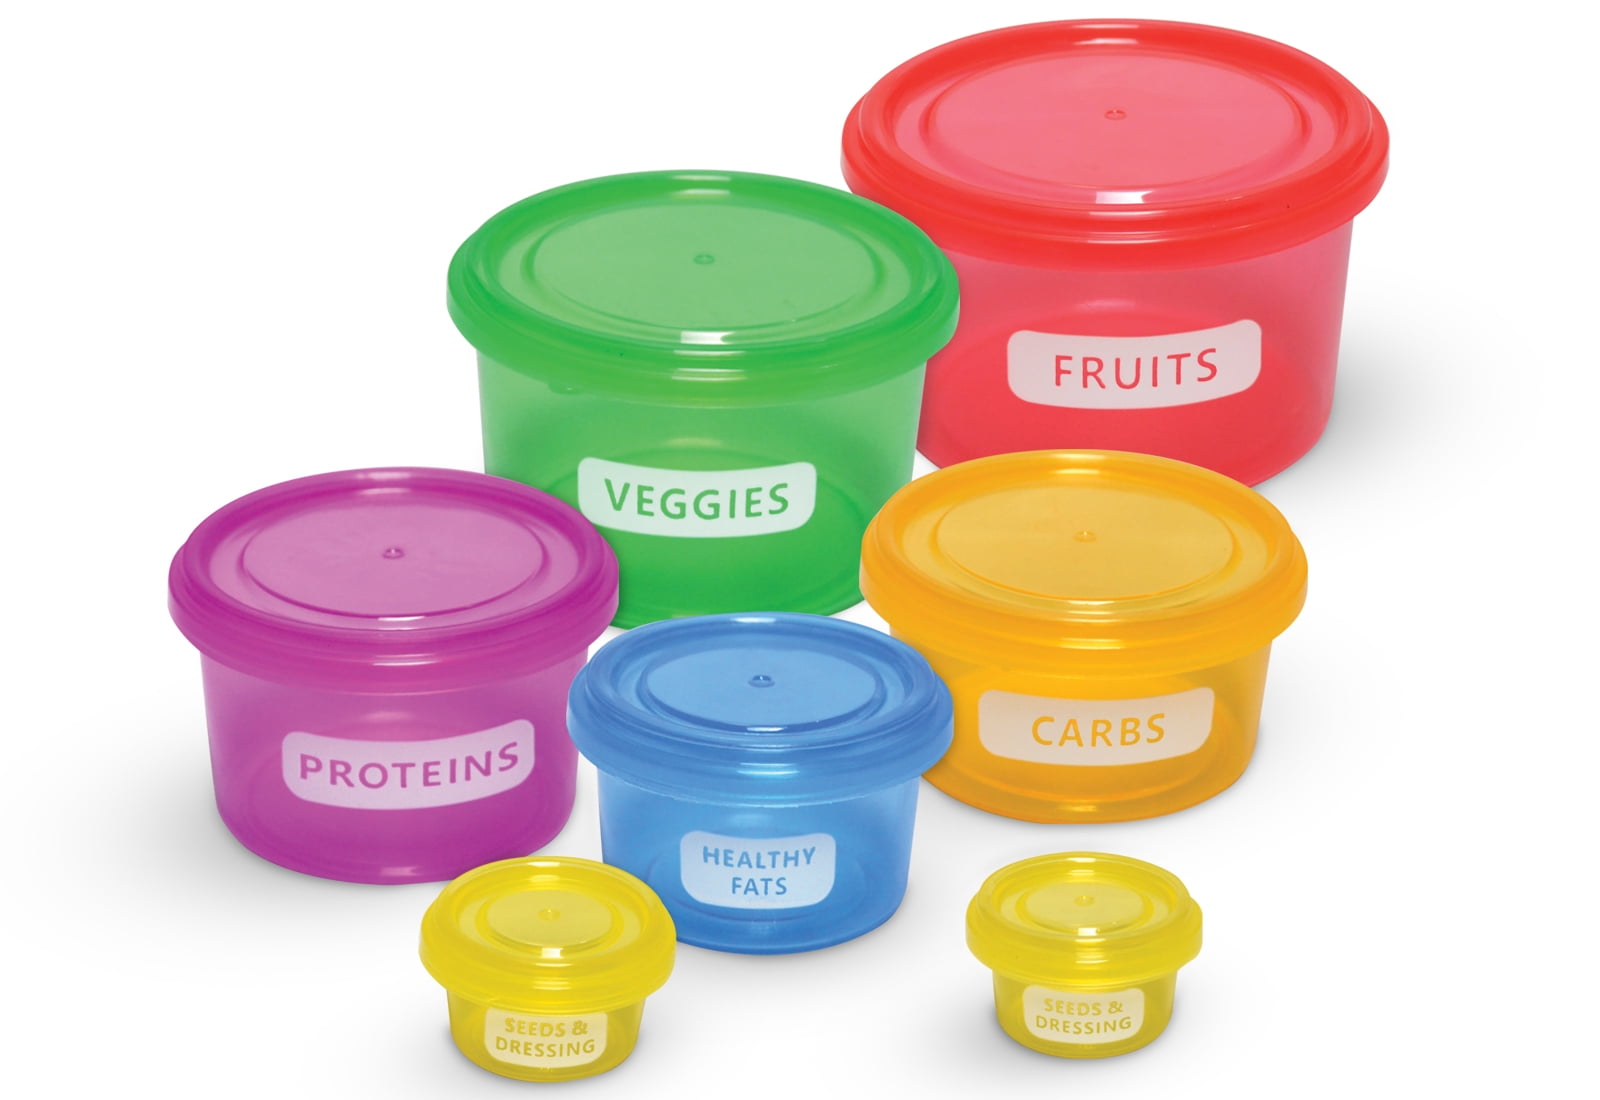 7 Piece Portion Control Container Set Weight Loss Diet Food Tubs Pots Storage UK 